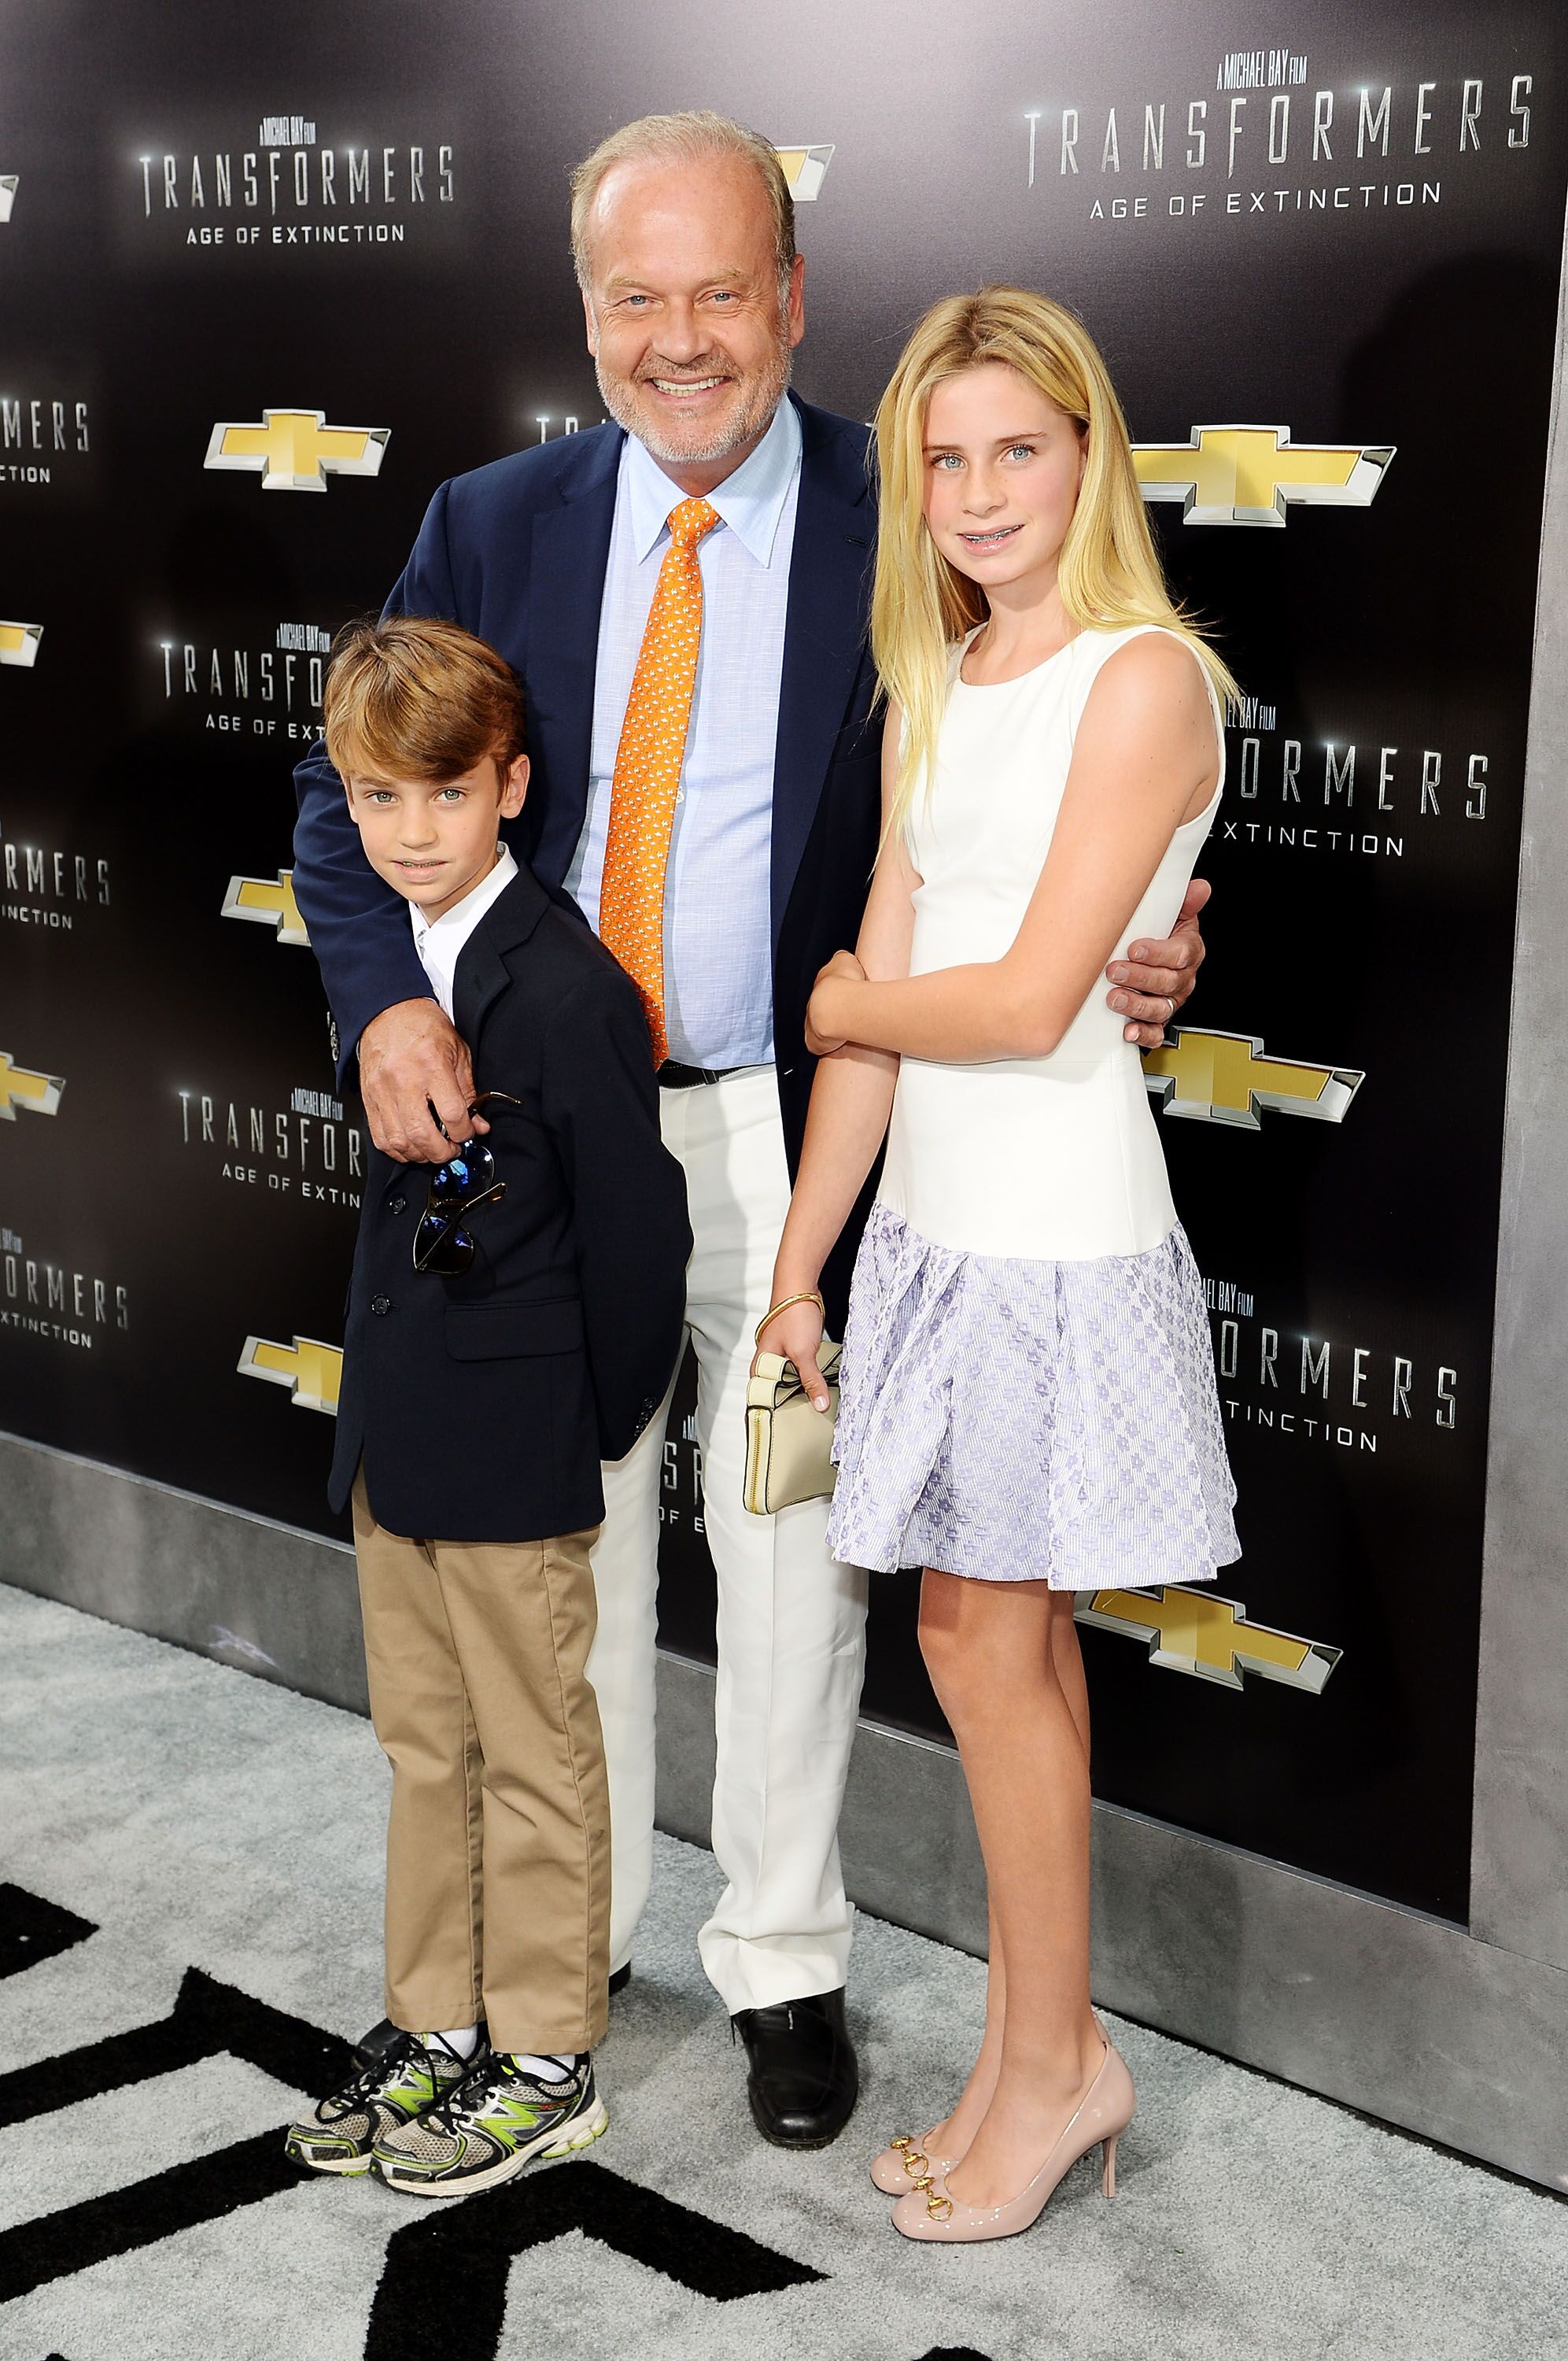 Kelsey Grammer with children Mason and Jude at the New York Premiere of "Transformers: Age Of Extinction" in 2014 | Source: Getty Images